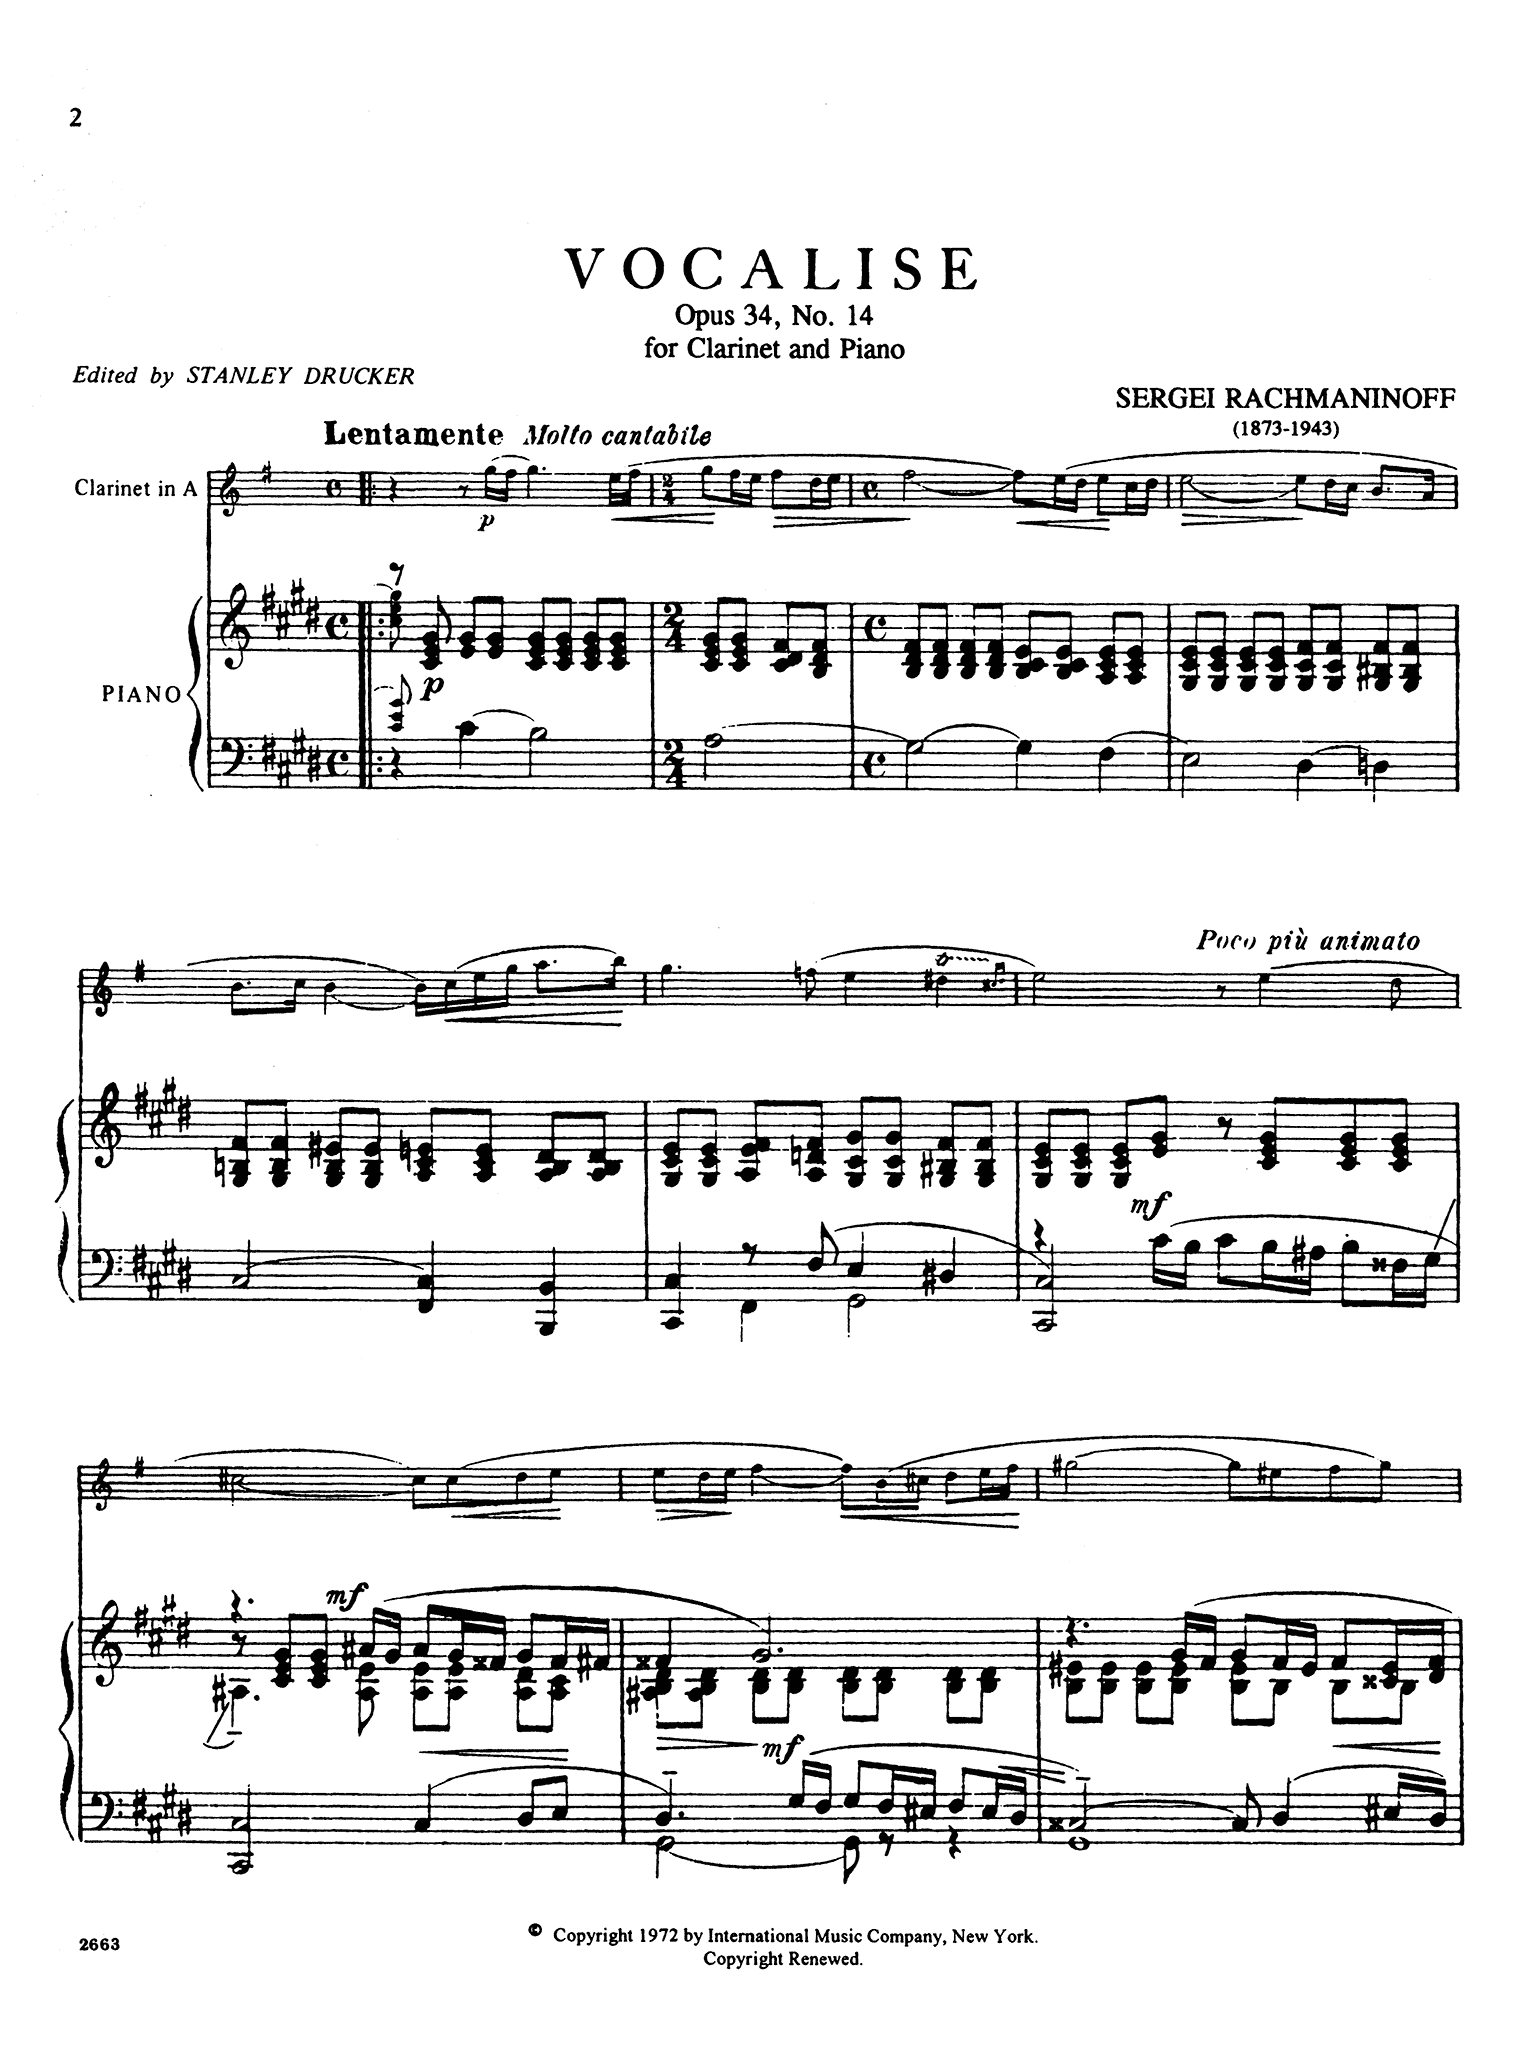 Rachmaninoff Vocalise, Op. 34 No. 14 for clarinet & piano score